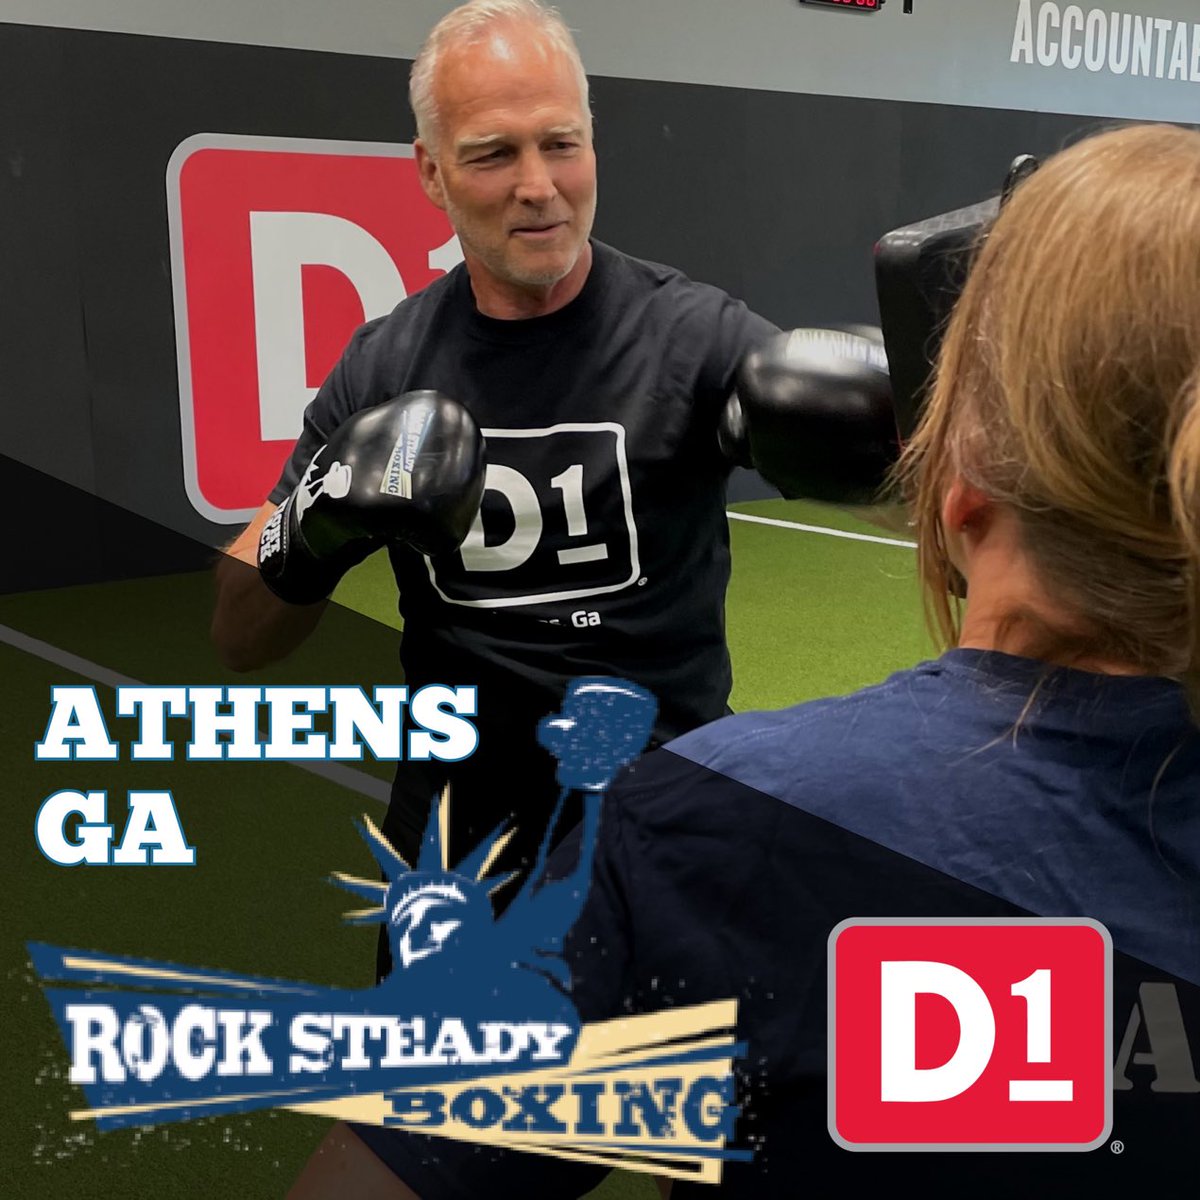 Rock Steady Boxing is coming to D1 Athens! Rock Steady,a non-contact boxing class, is a proven method designed to help people fight Parkinson’s! The 1st class starts on September 26th at D1 Athens! Come join me as we knock out Parkinson’s! For more information call (706)690-4162